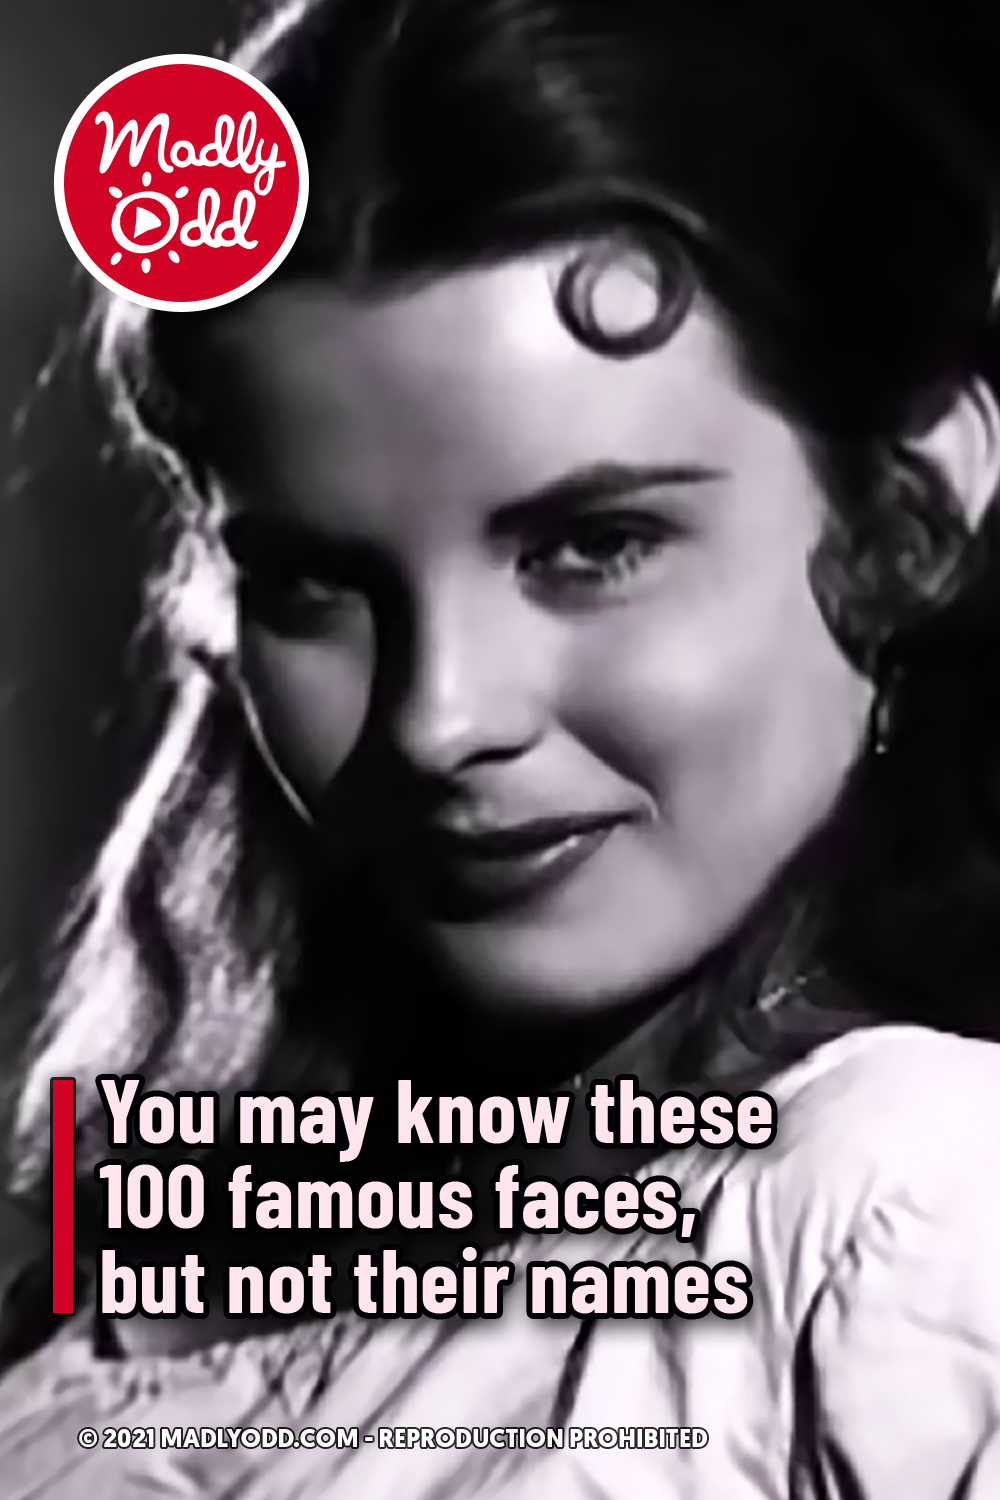 You may know these 100 famous faces, but not their names